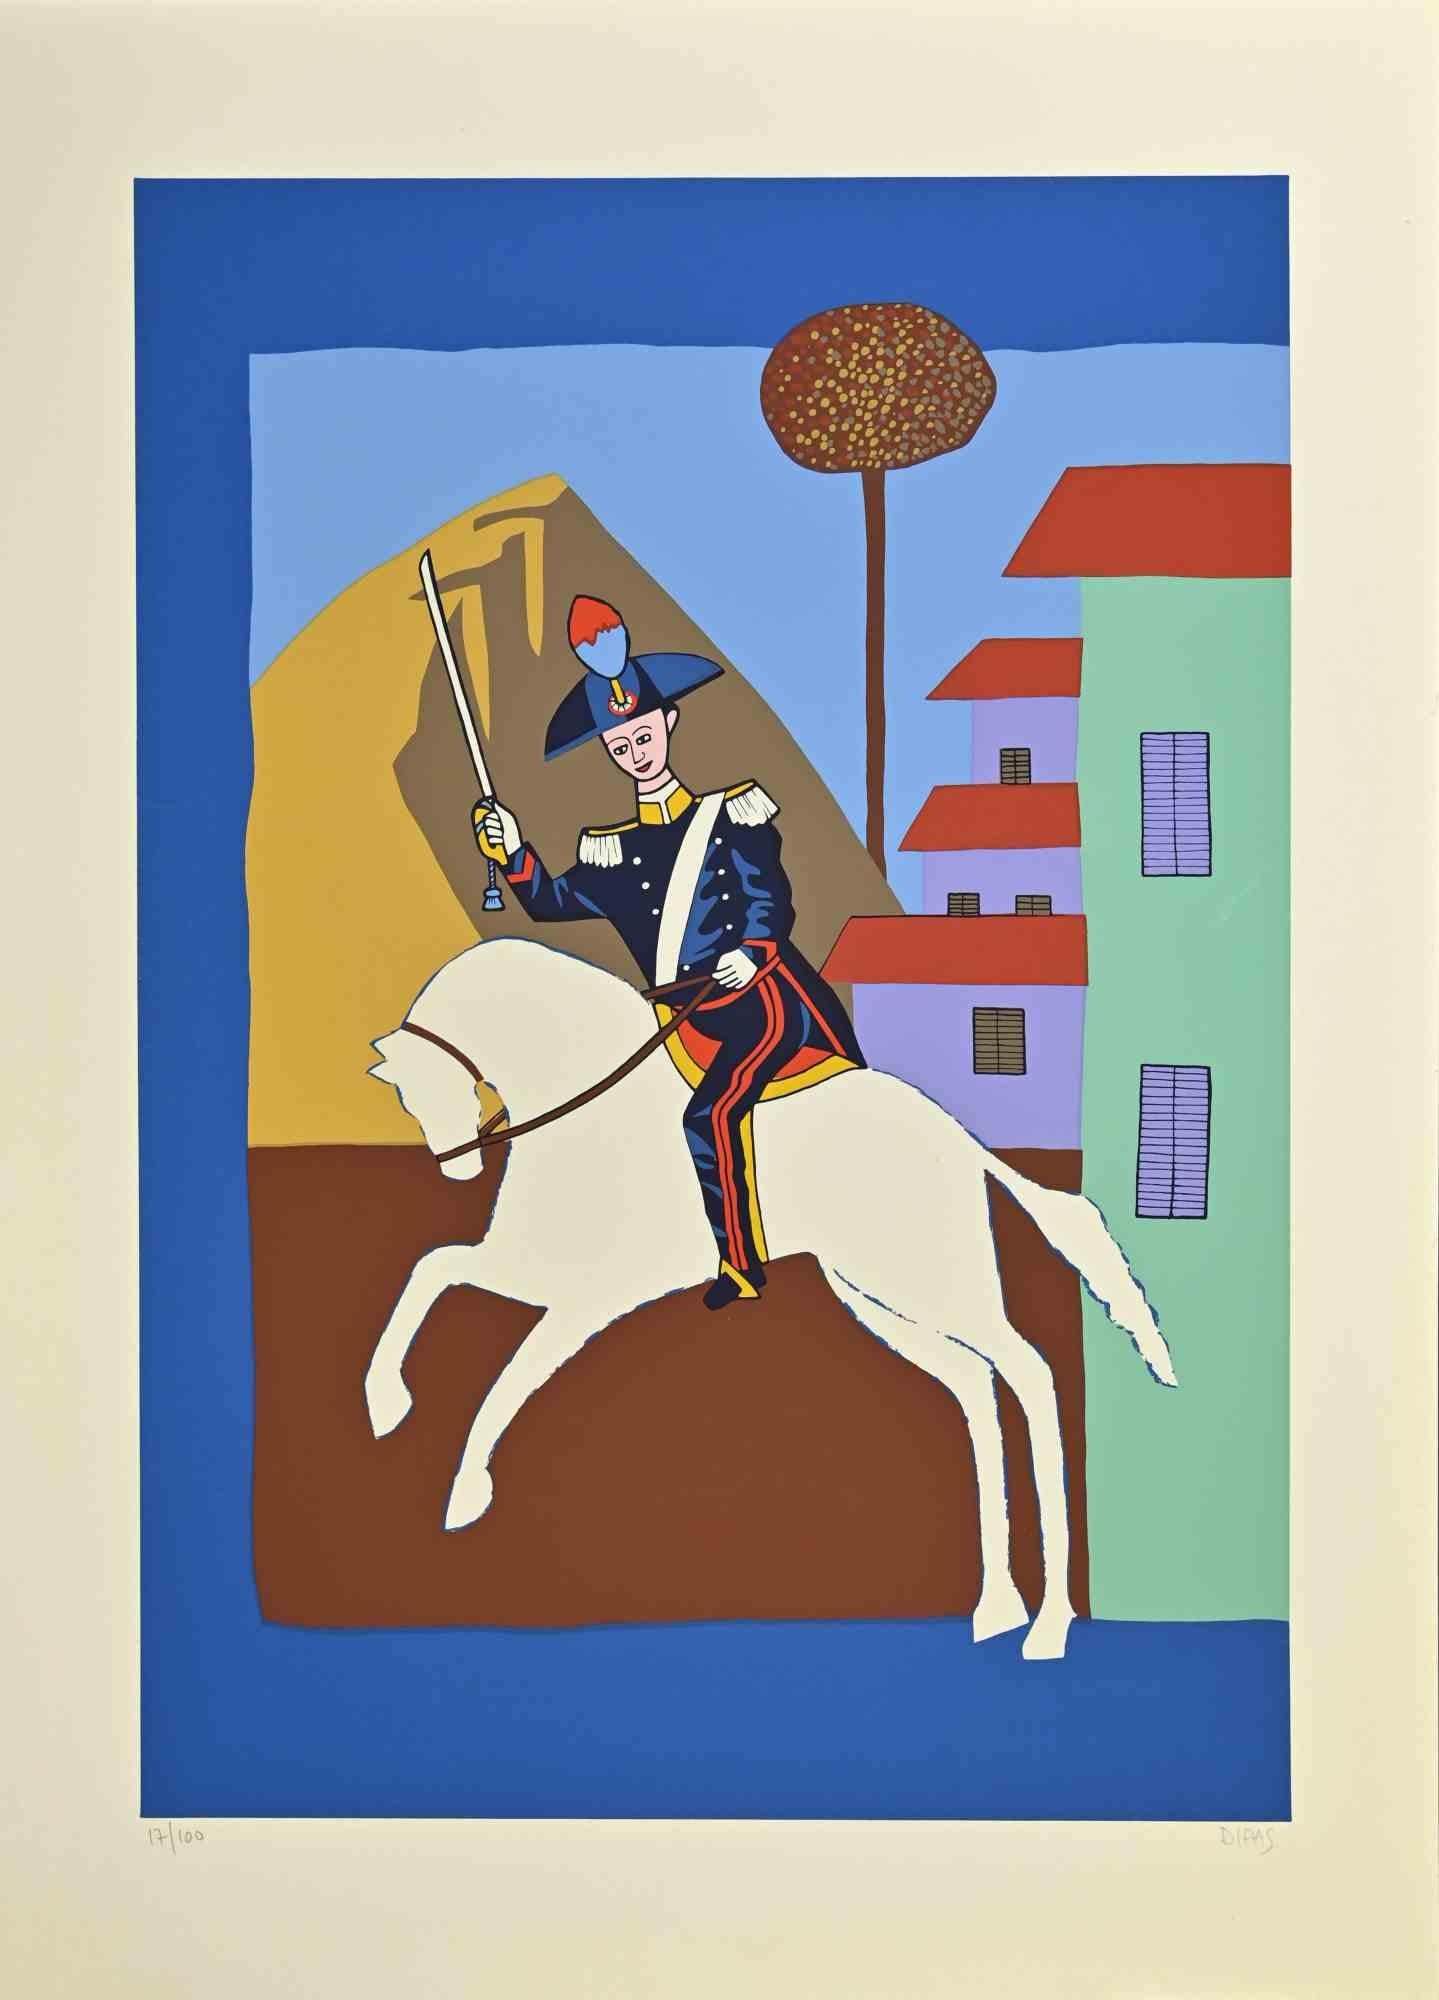 Carabinier on Horse - Screen Print by Dipas - 1970s